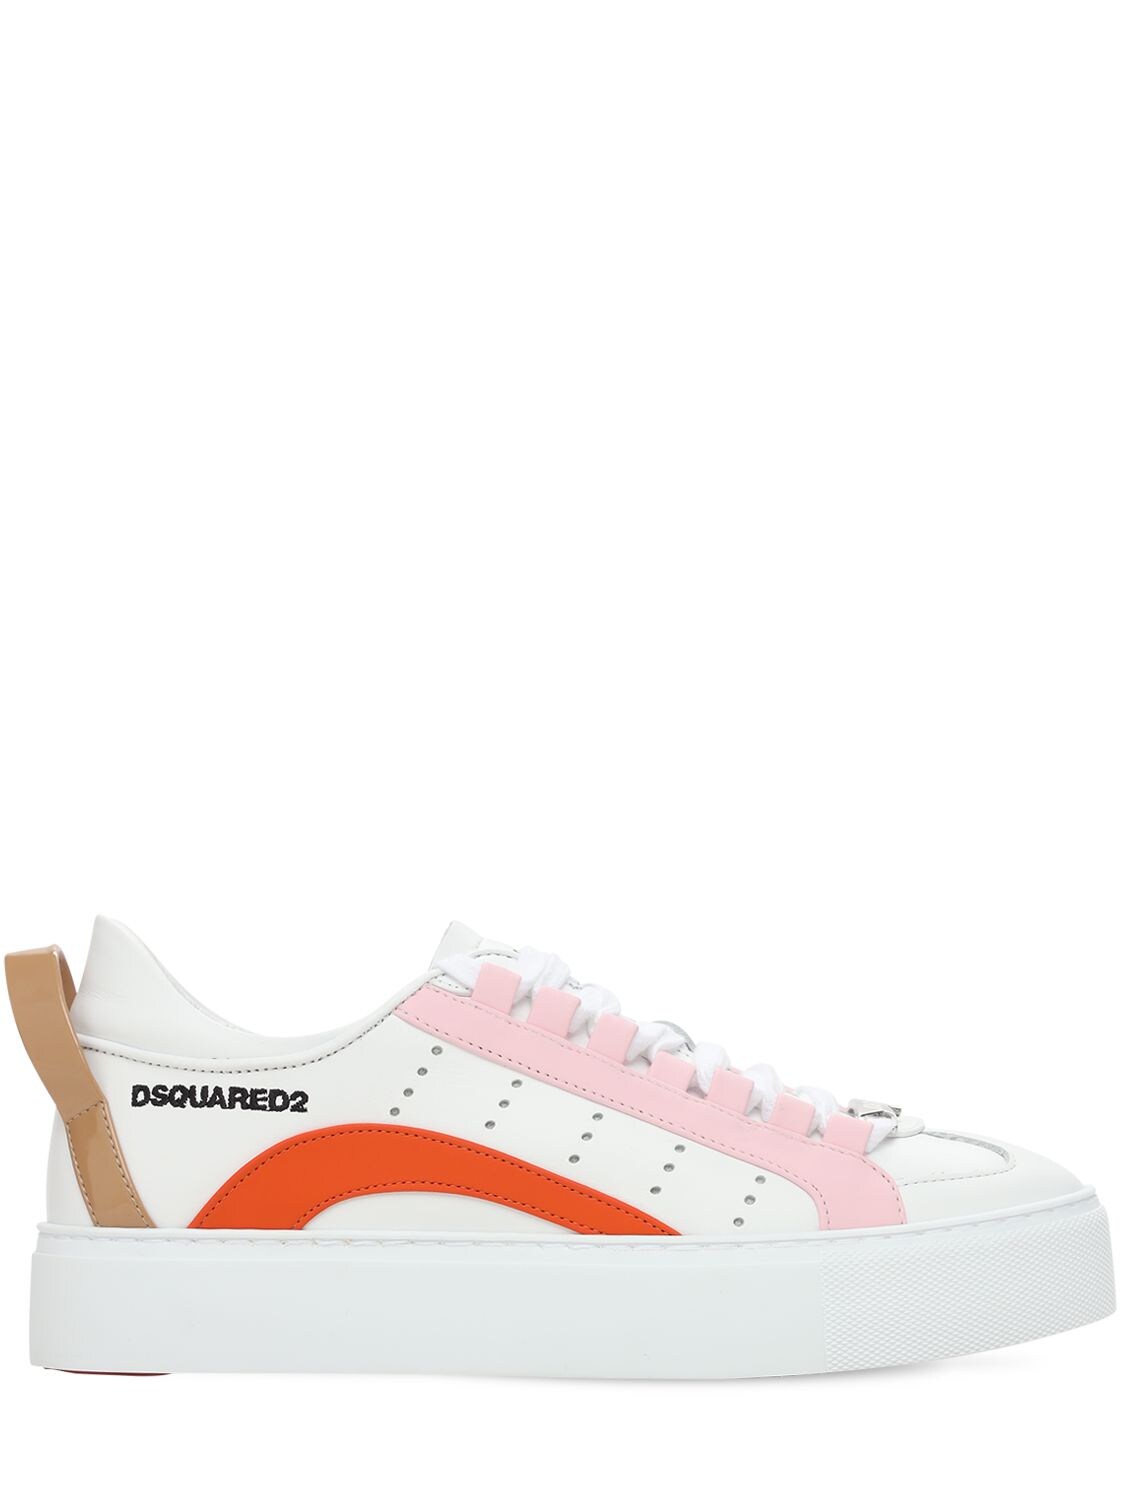 DSQUARED2 30MM 551 LEATHER & RUBBER SNEAKERS,73I0EO009-TTIWNJM1